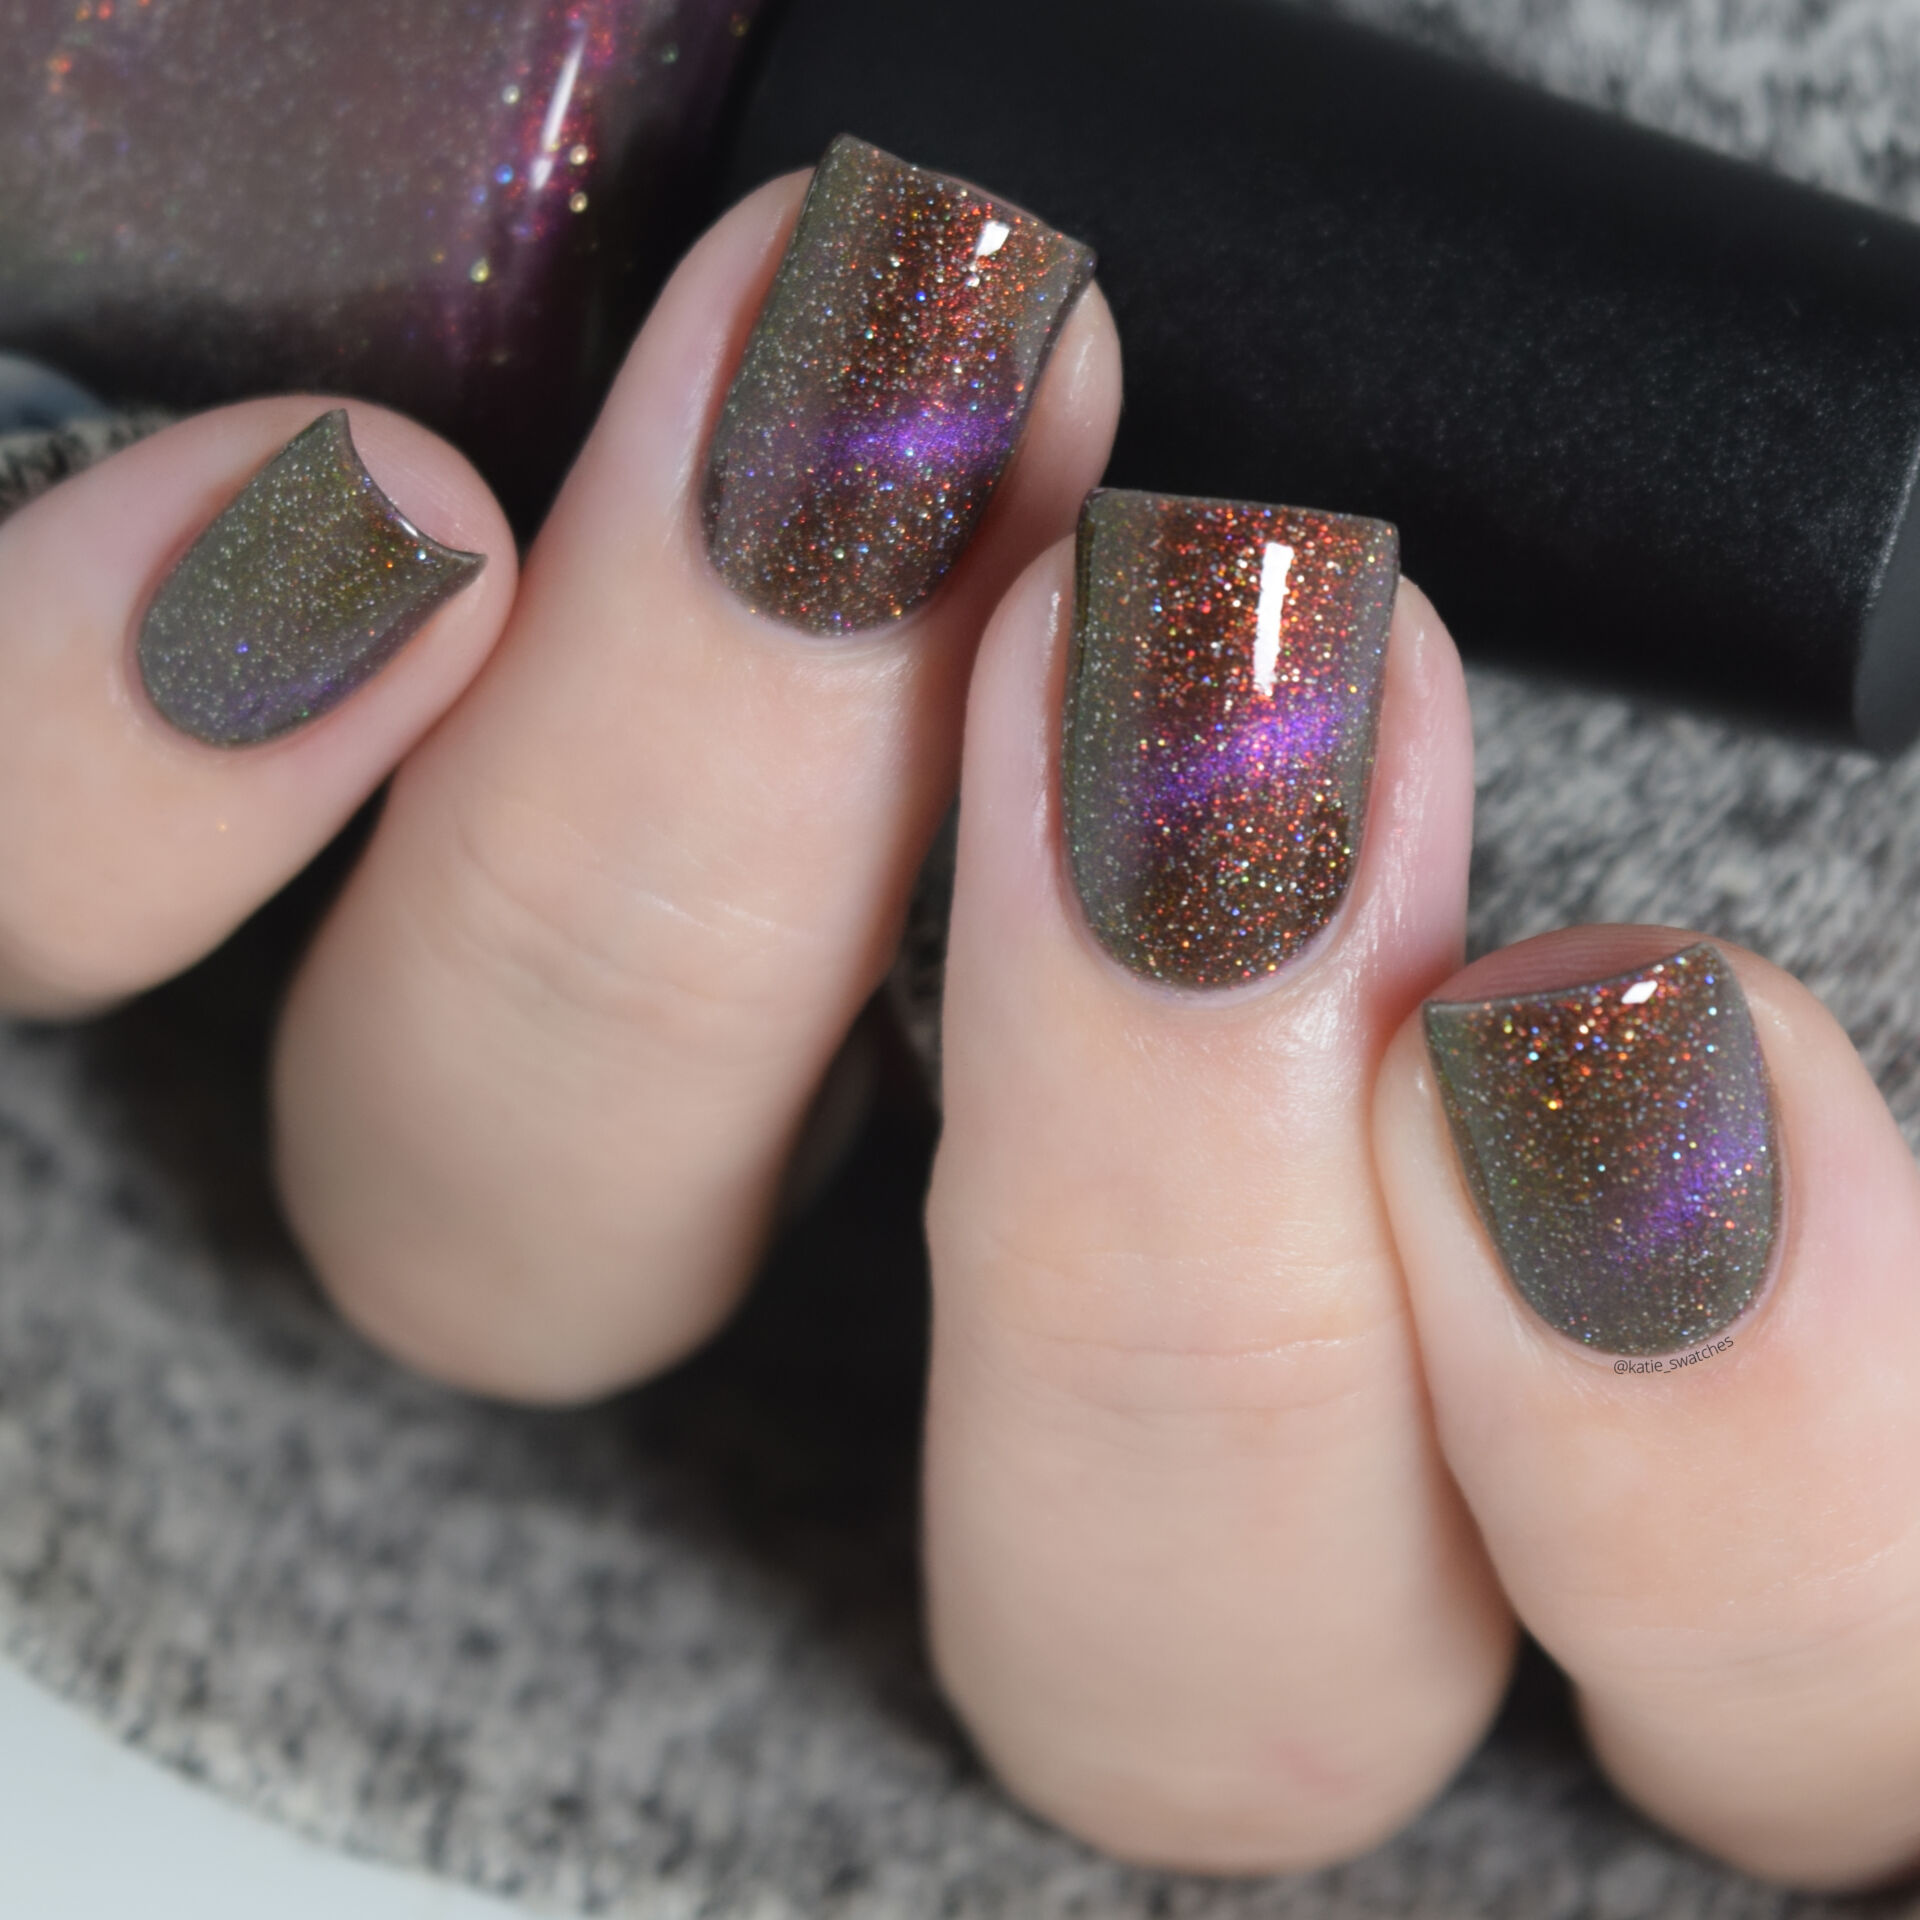 Treo Lacquer - Quantum Entanglement magnetic nail polish swatch - Polish Pickup July 2021 PPU Rewind